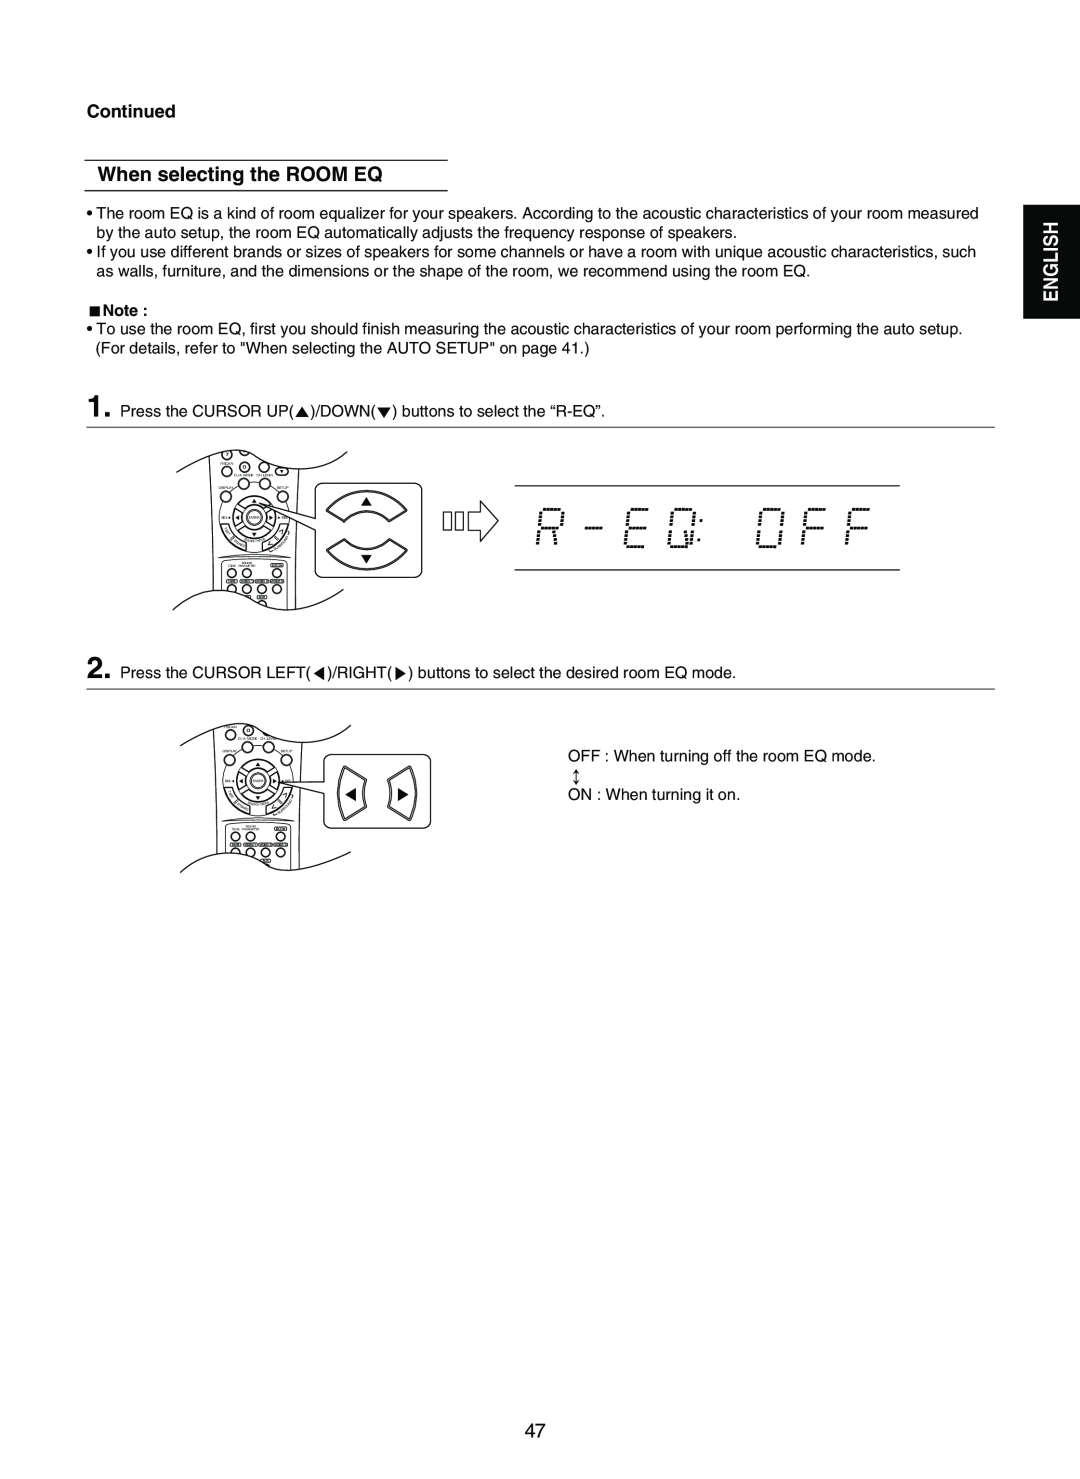 Sherwood RD-7502 manual When selecting the ROOM EQ, Continued, English 